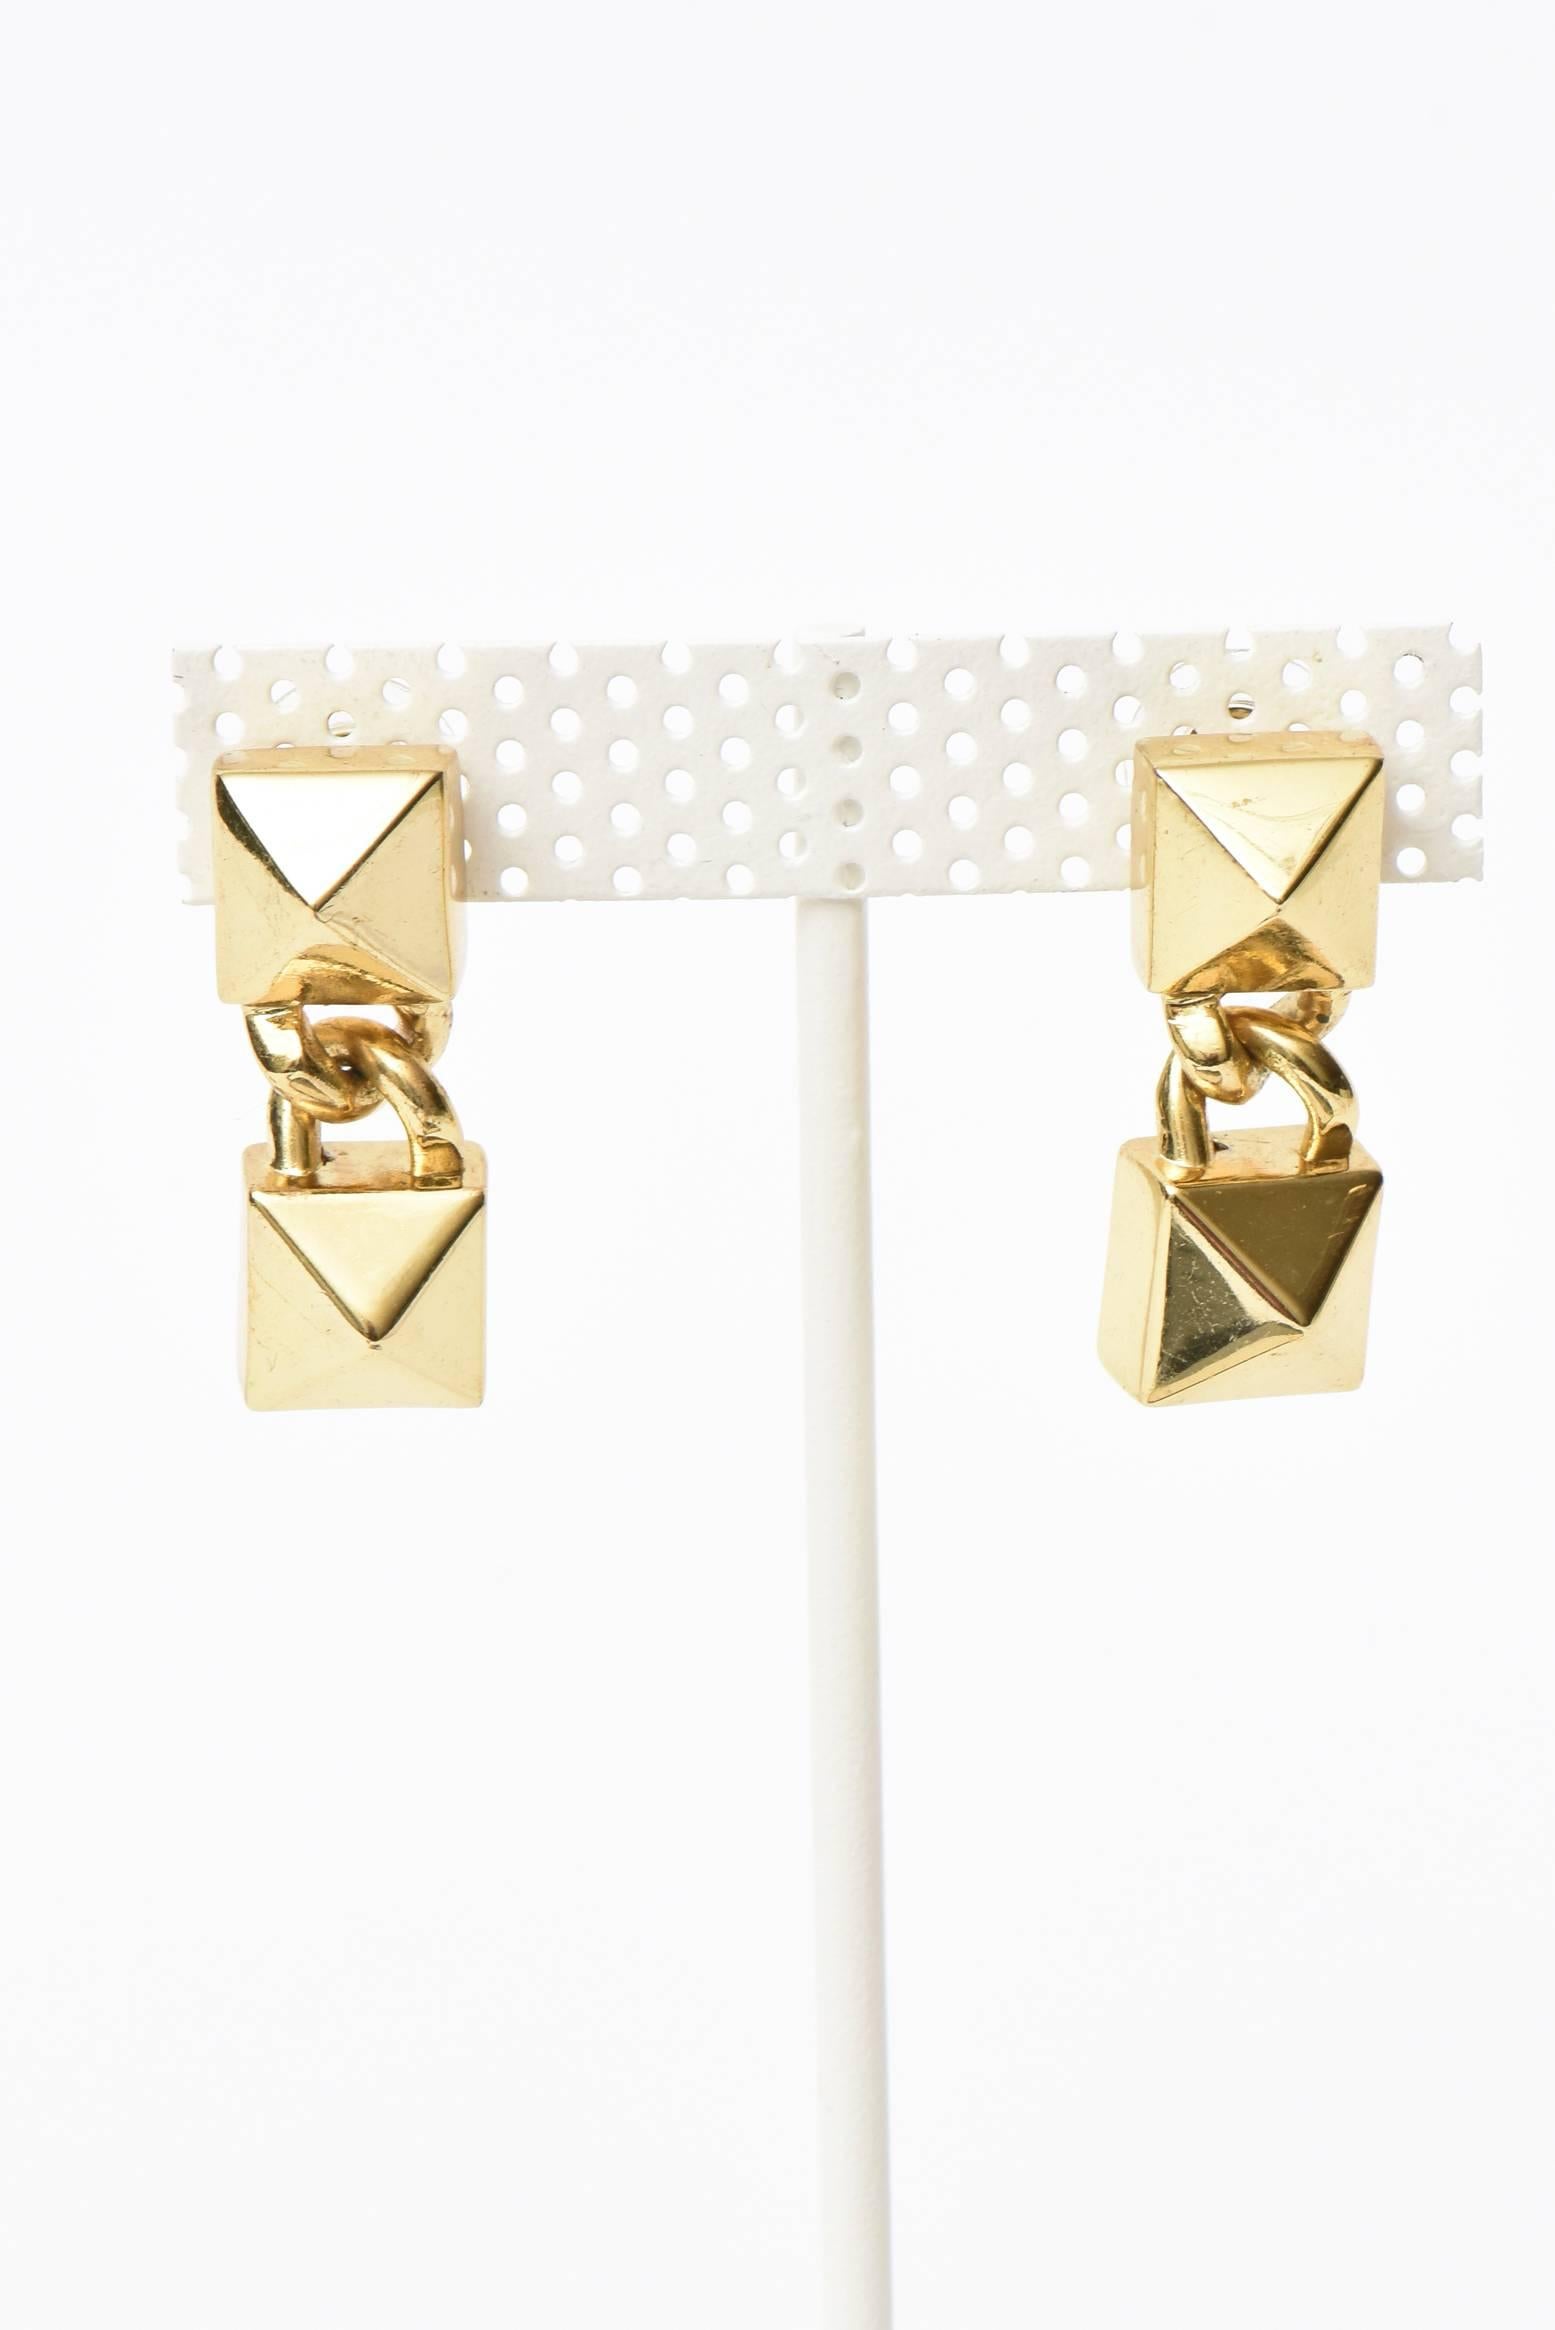 These dynamic pair of signed Fallon pierced dangle drop earrings are sculptural and dimensional. Inverted raised sculptural forms in a raised pattern that is almost hard to see in these photos make up the shape. They are gold plated and look